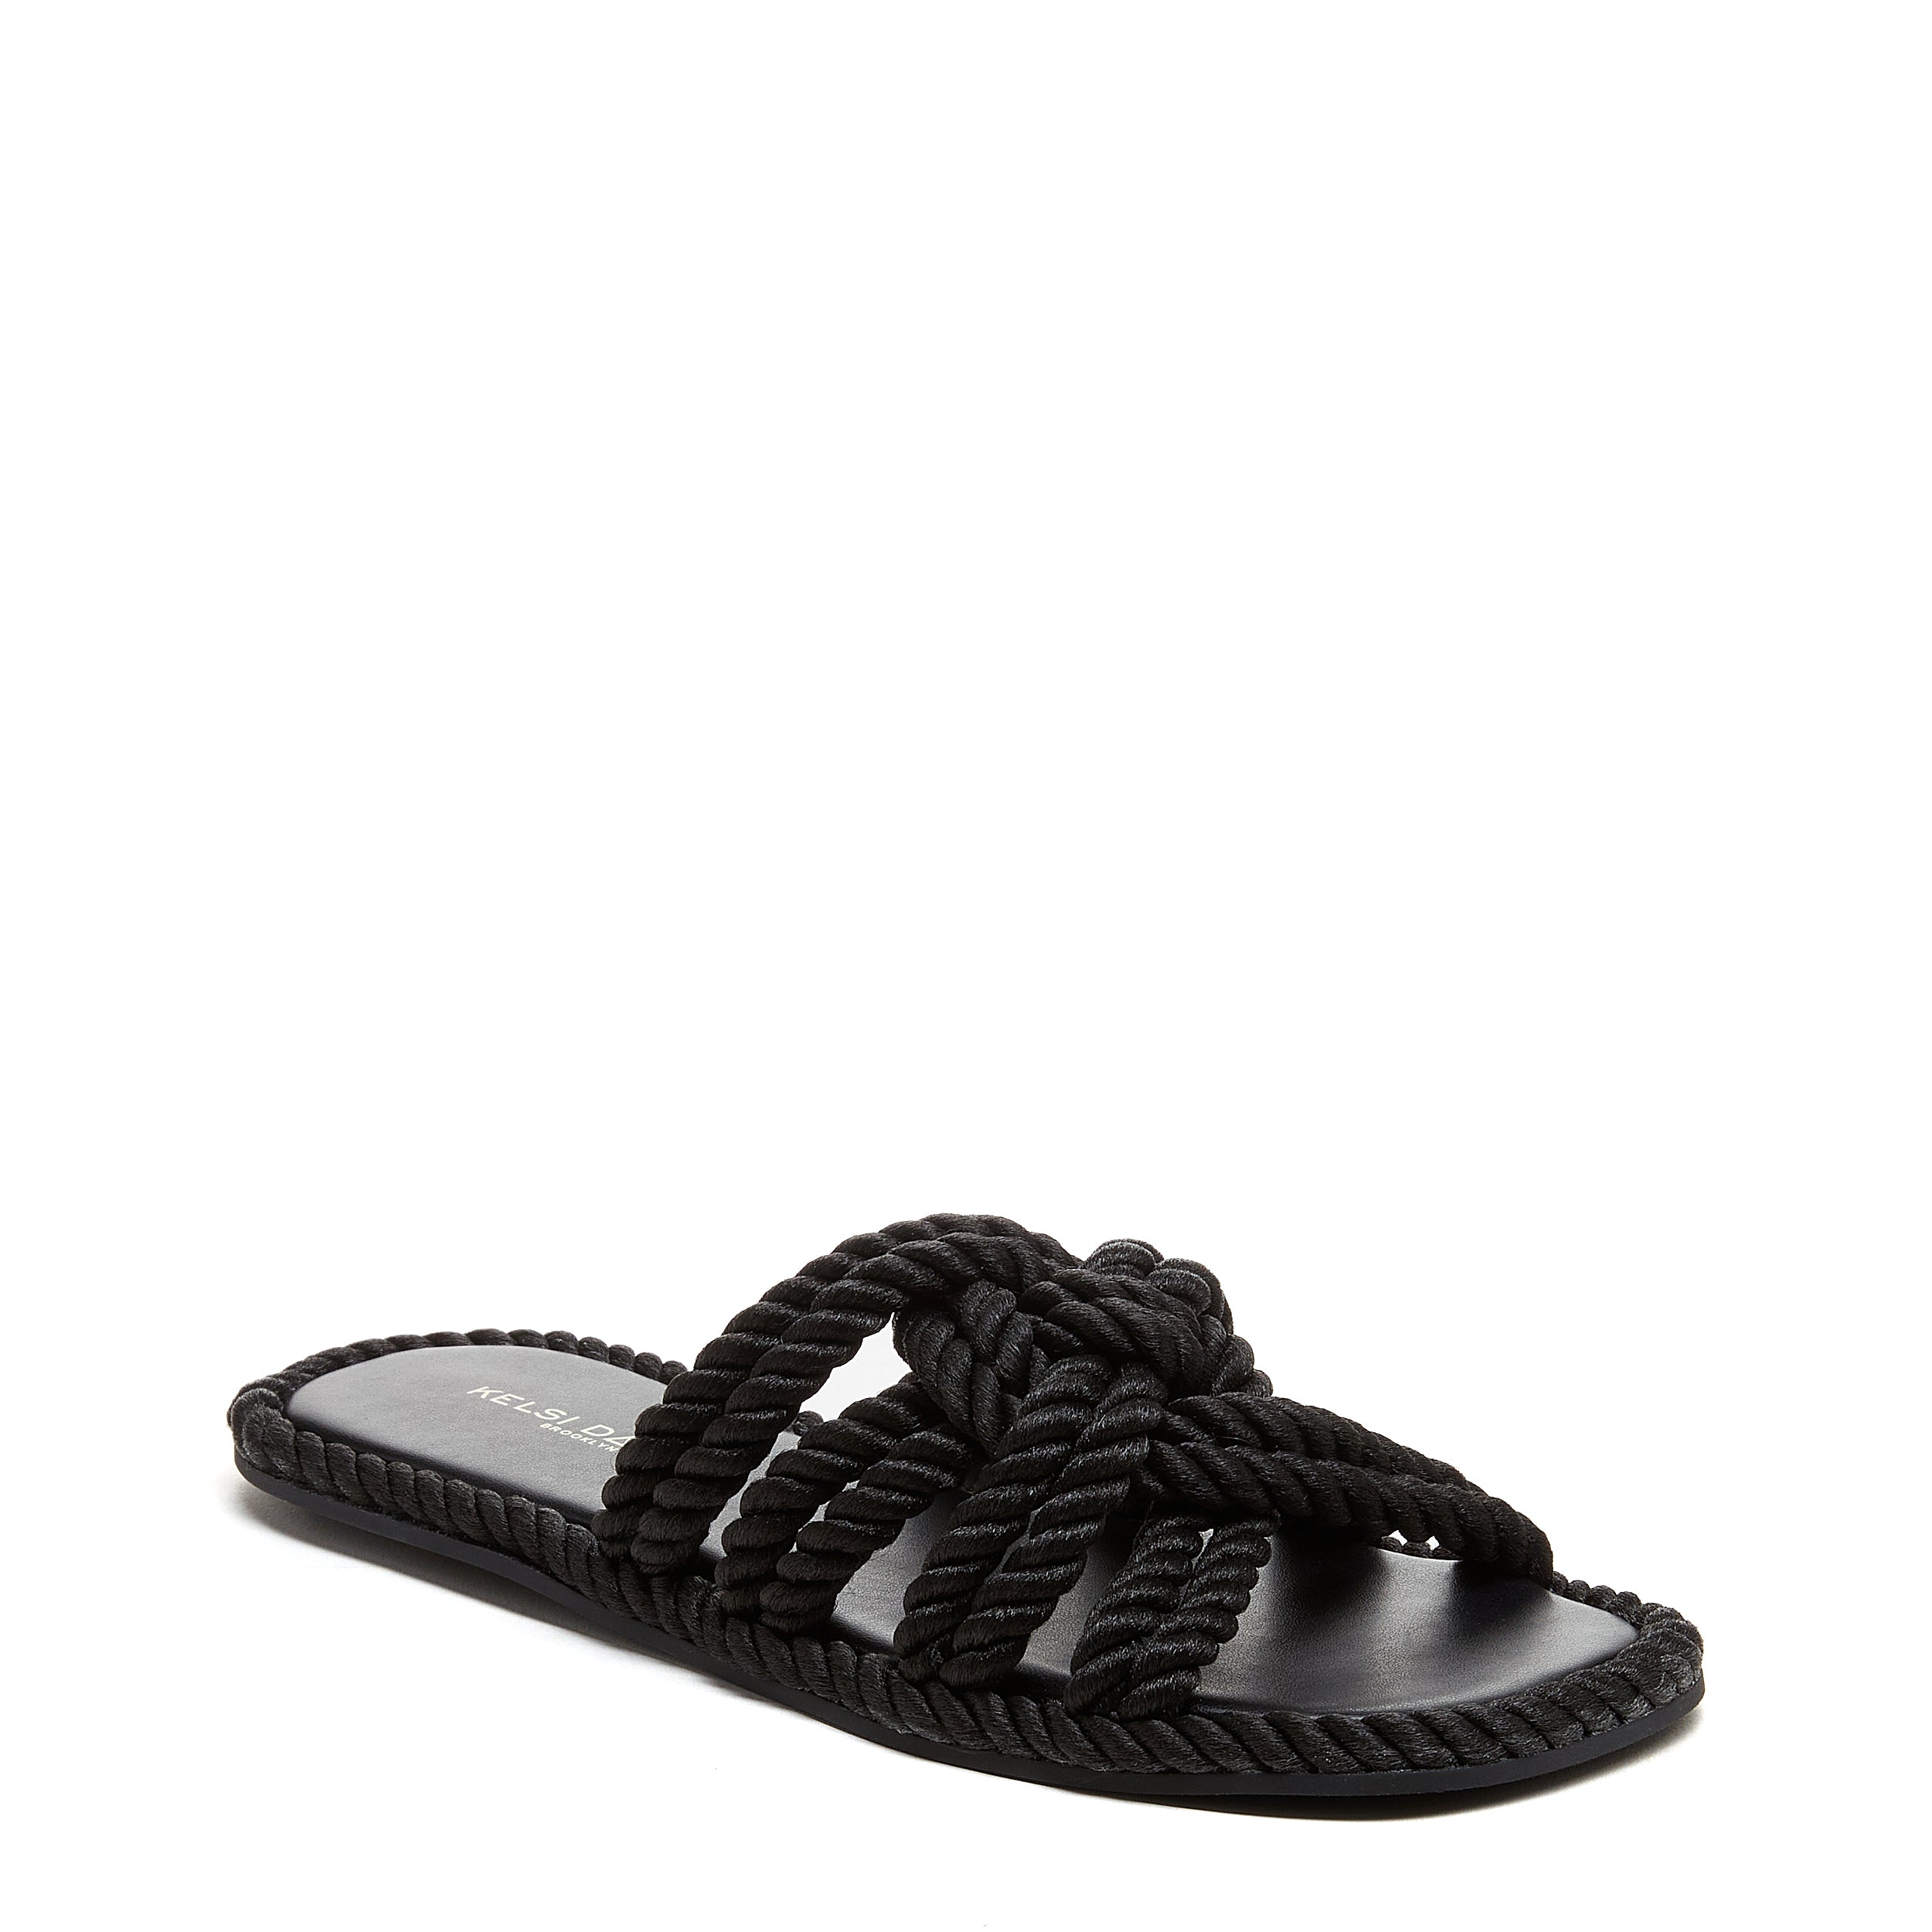 Buy Imperio Black Men Woven Leather Slip On Sandals Online at Regal Shoes |  8464824